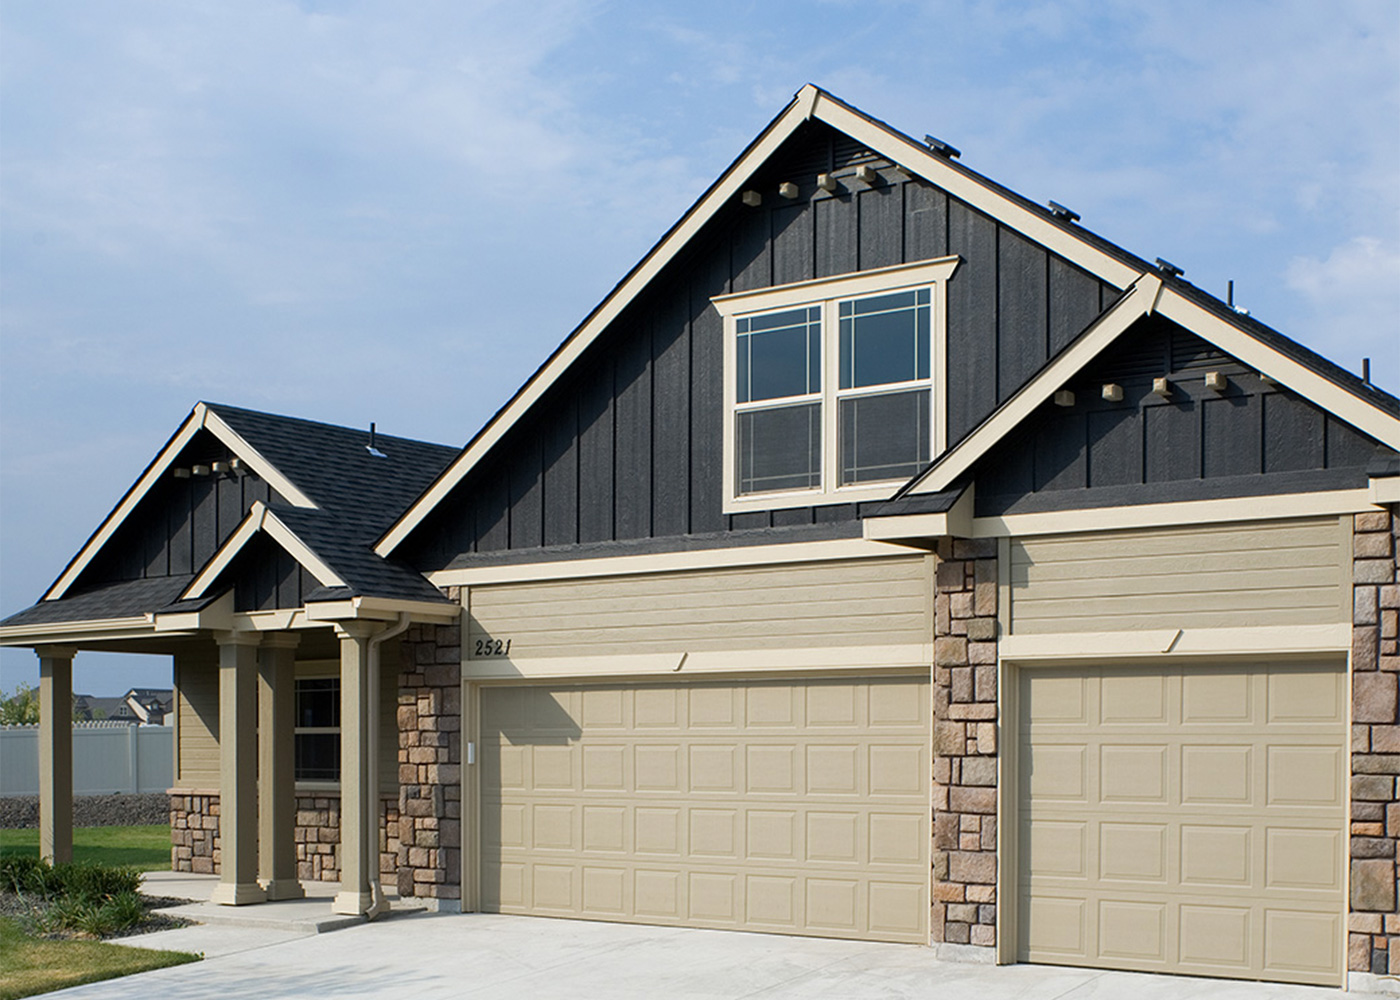 TruWood Siding and Trim, engineered wood, case studies, product gallery, FSC-certified